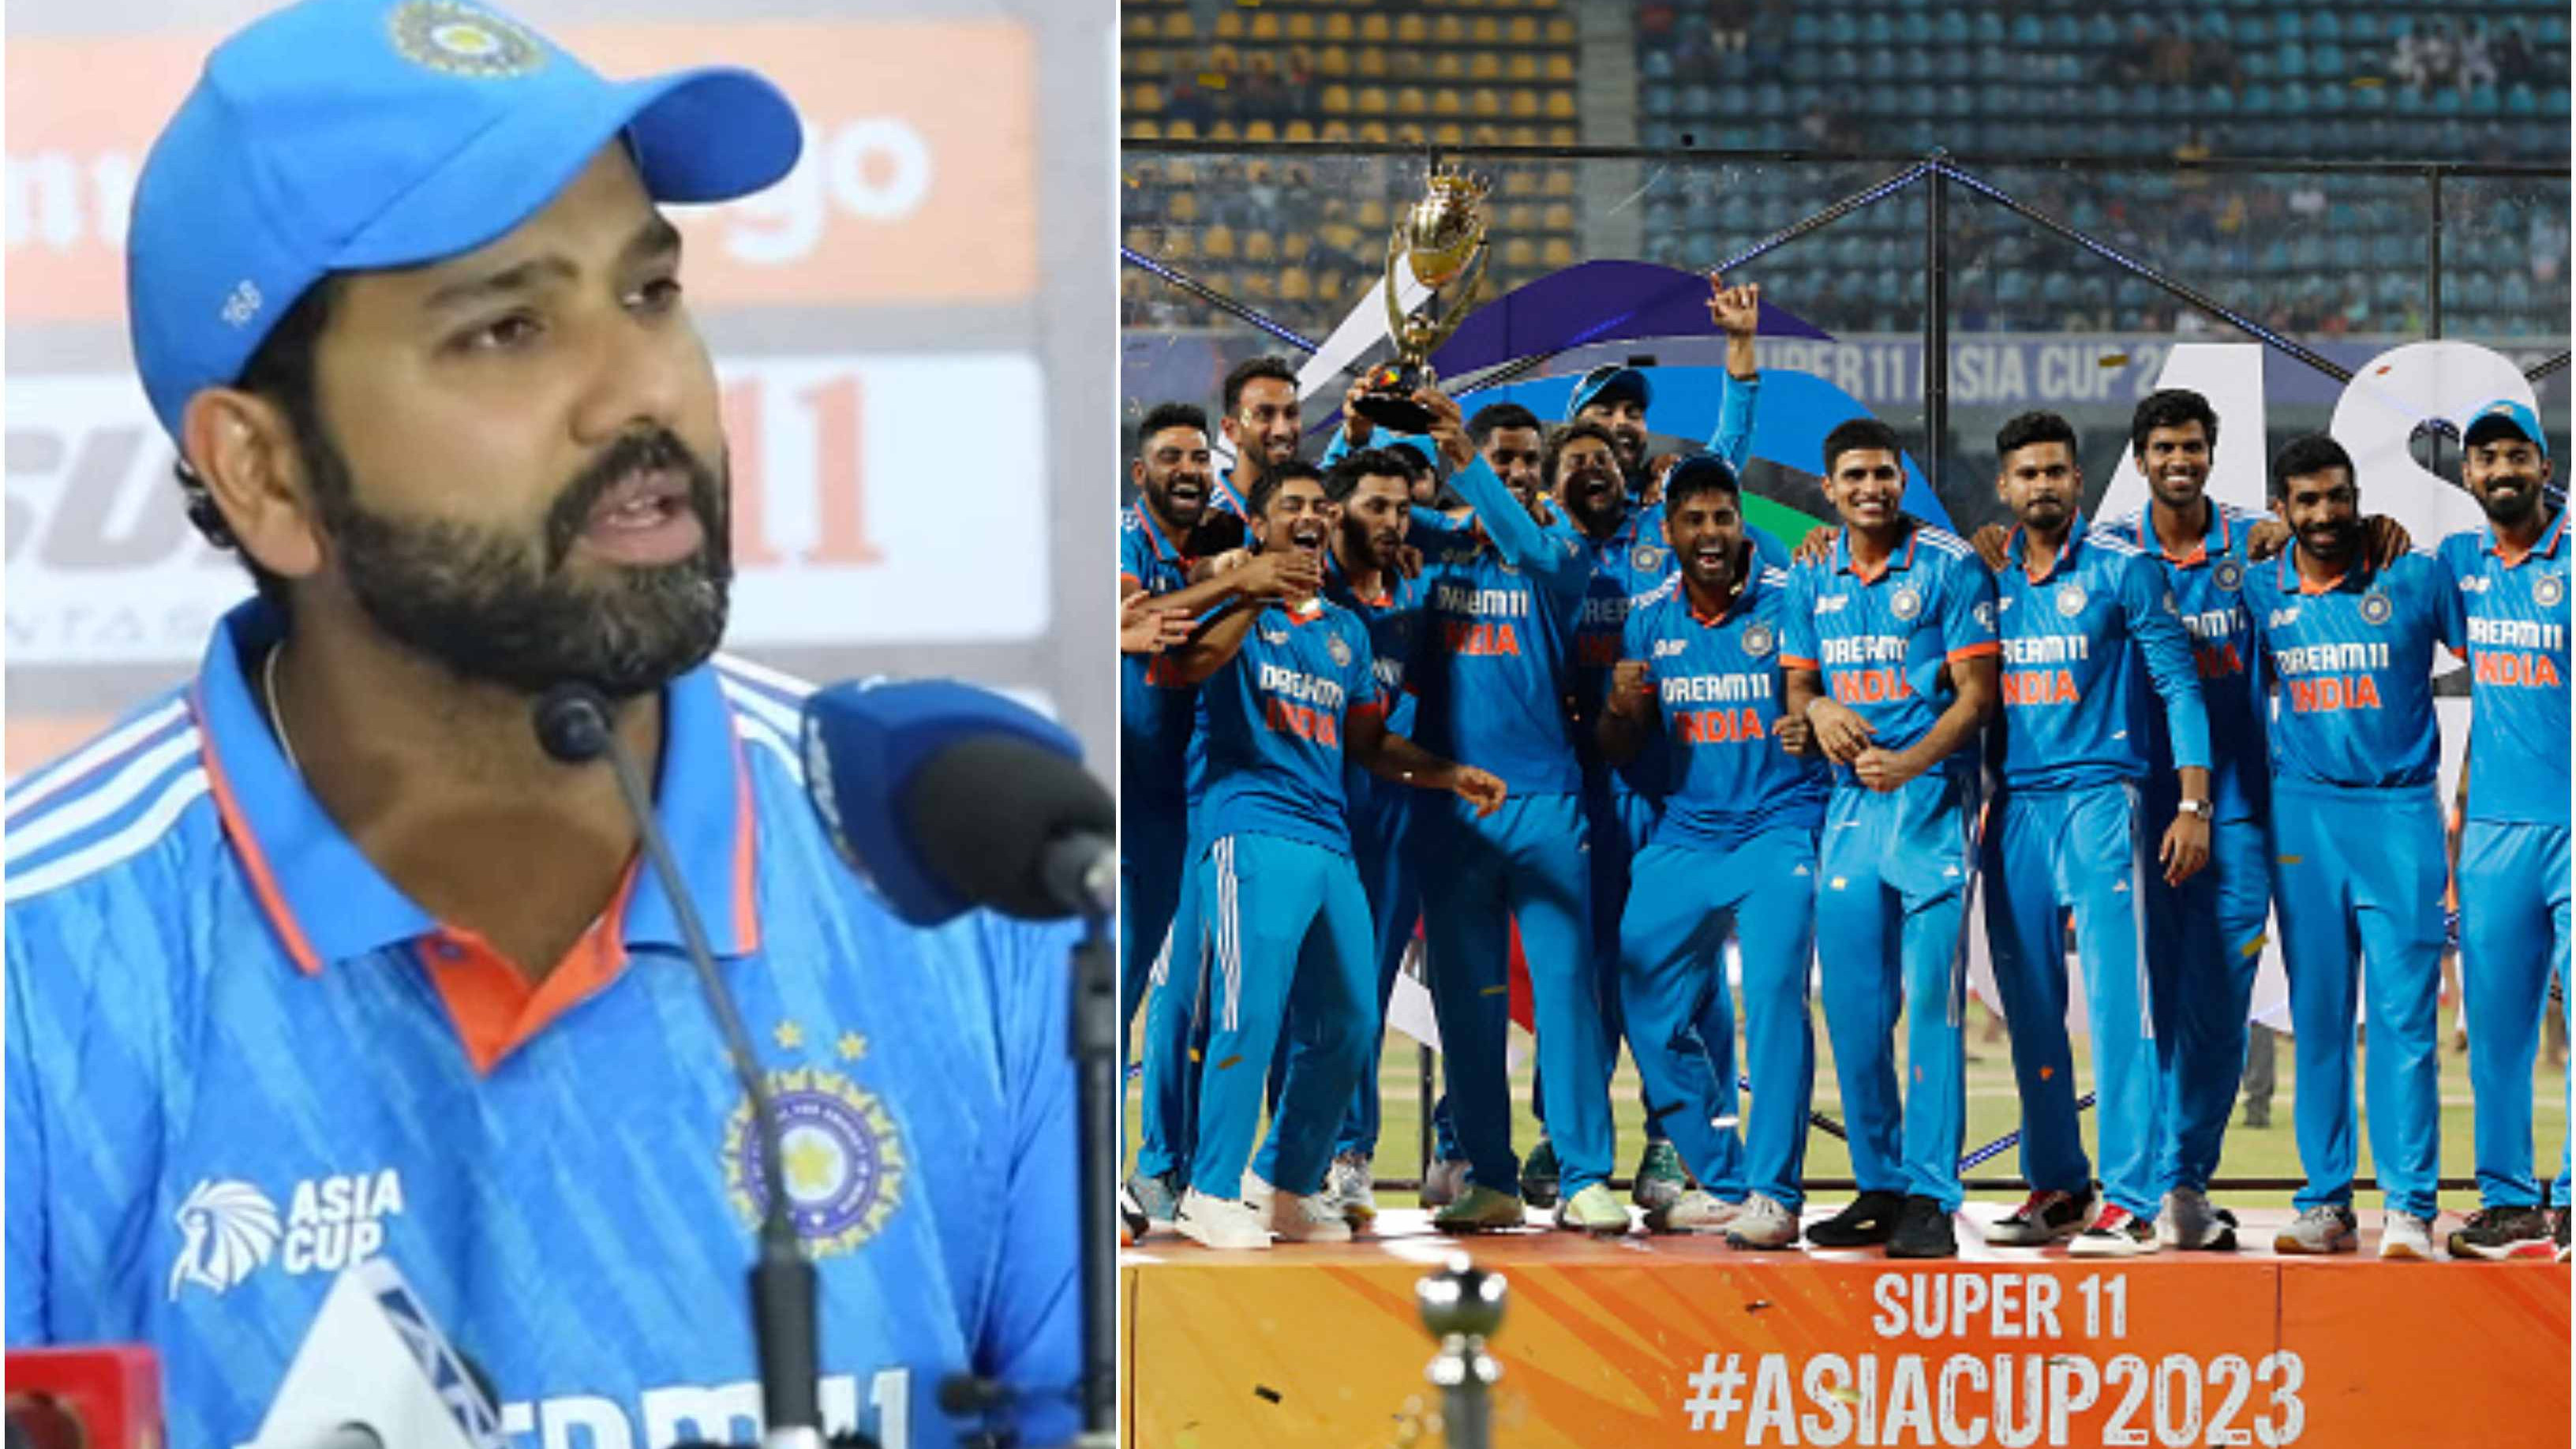 Asia Cup 2023: “Whoever got opportunity, they did their job,” Rohit Sharma lauds his troops for performing under pressure